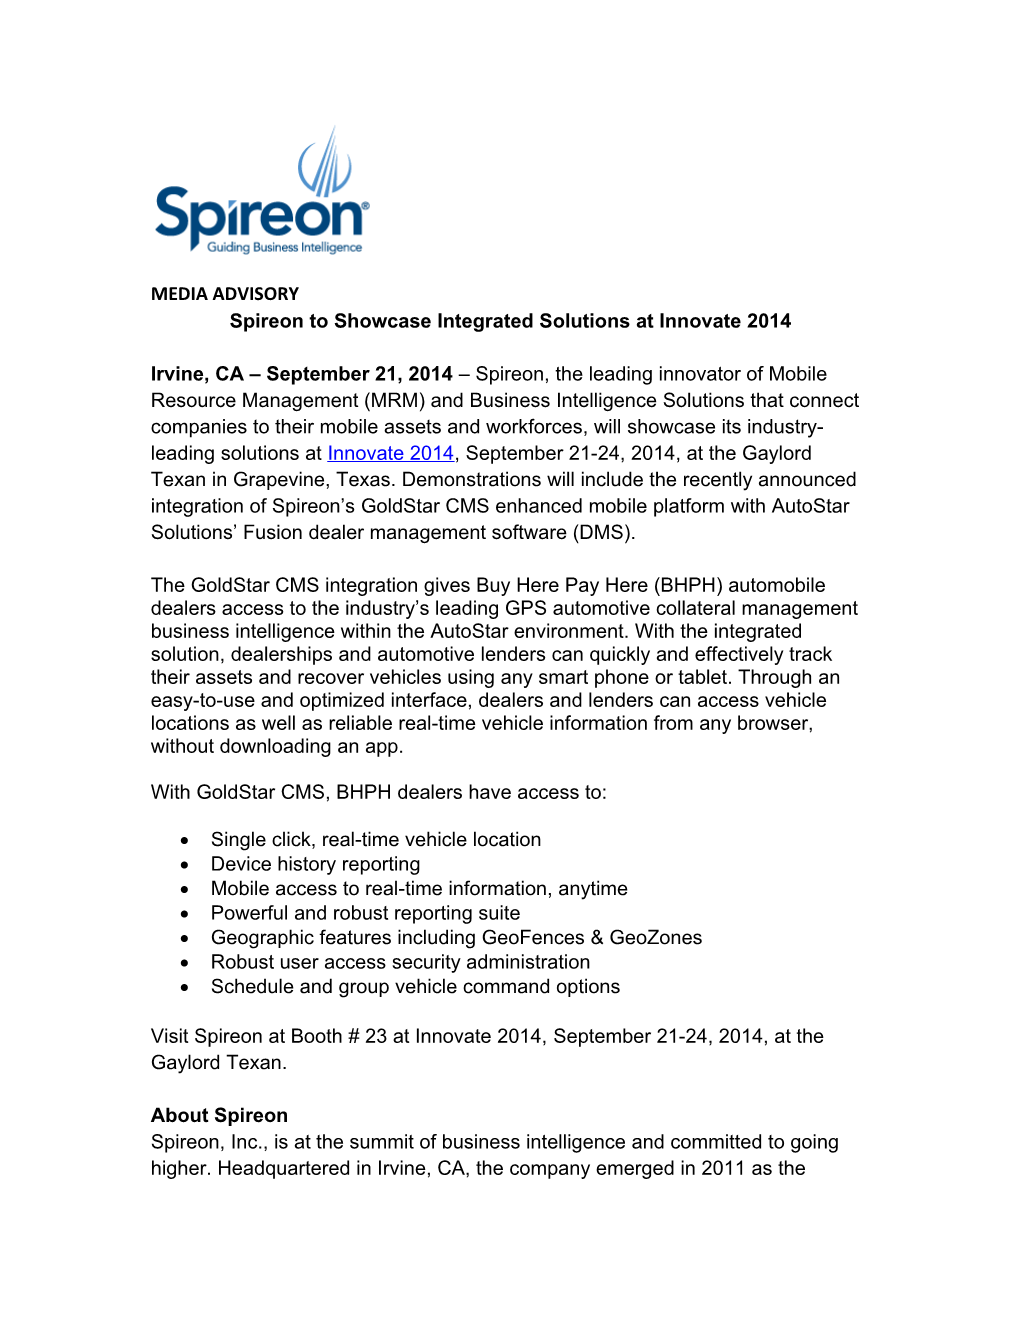 Spireon to Showcase Integrated Solutions at Innovate 2014